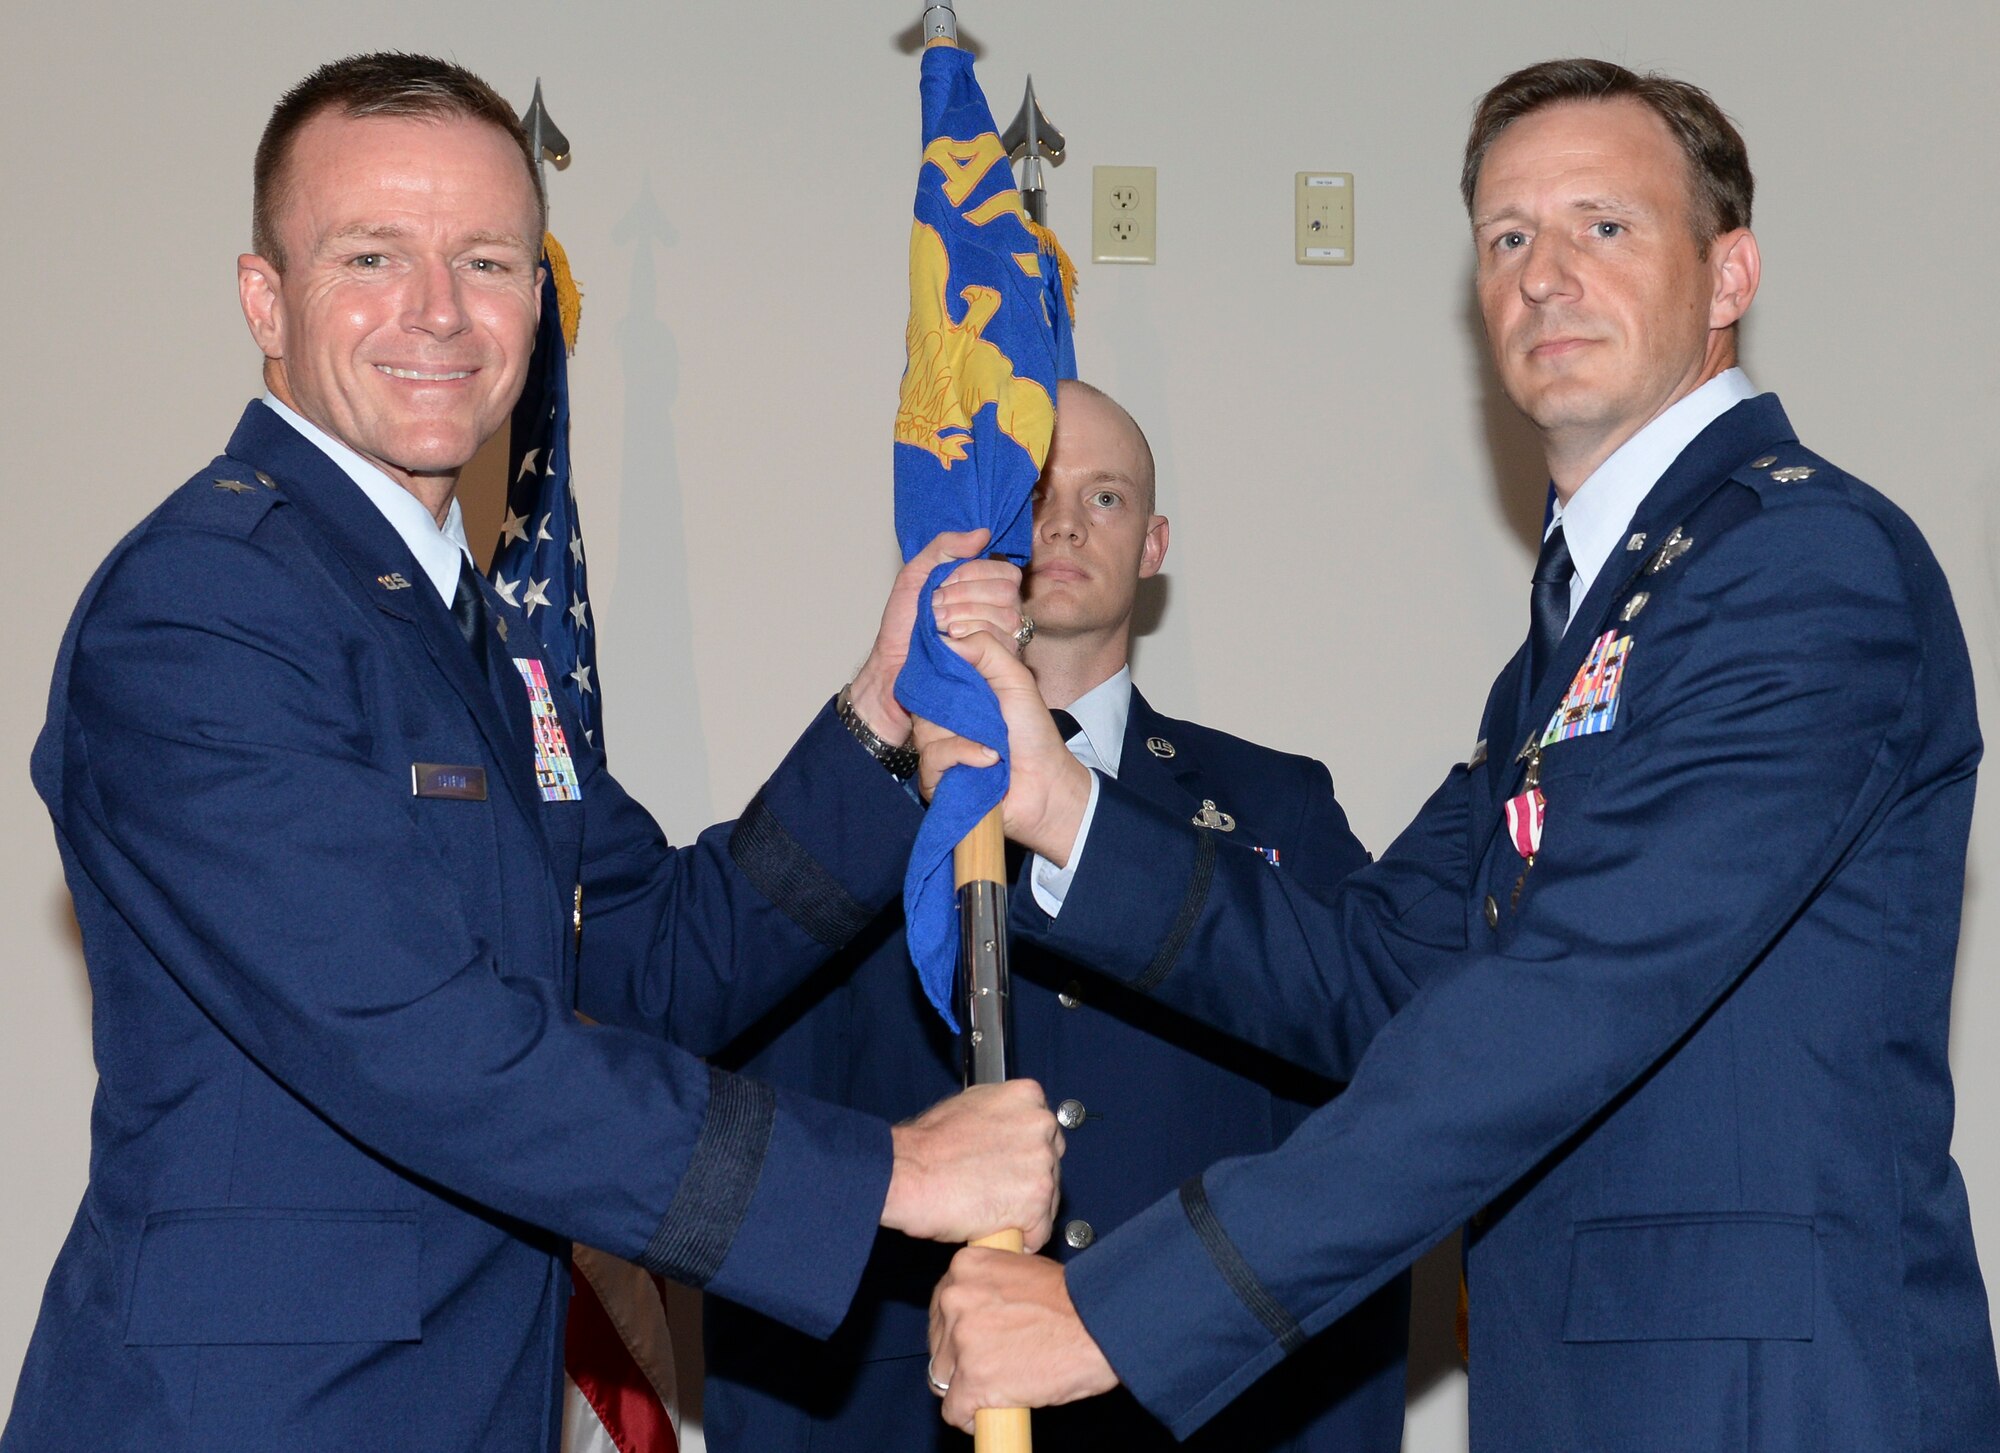 U.S. Air Force Lt. Col. Evan H. Gardner, outgoing commander, Air Force Rescue Coordination Center relinquishes the AFRCC guidon to Brig. Gen. Kenneth P. Ekman, vice commander, 1 AF (Air Forces Northern), during a change of command ceremony July 2, 2019, Tyndall AFB, Fla.